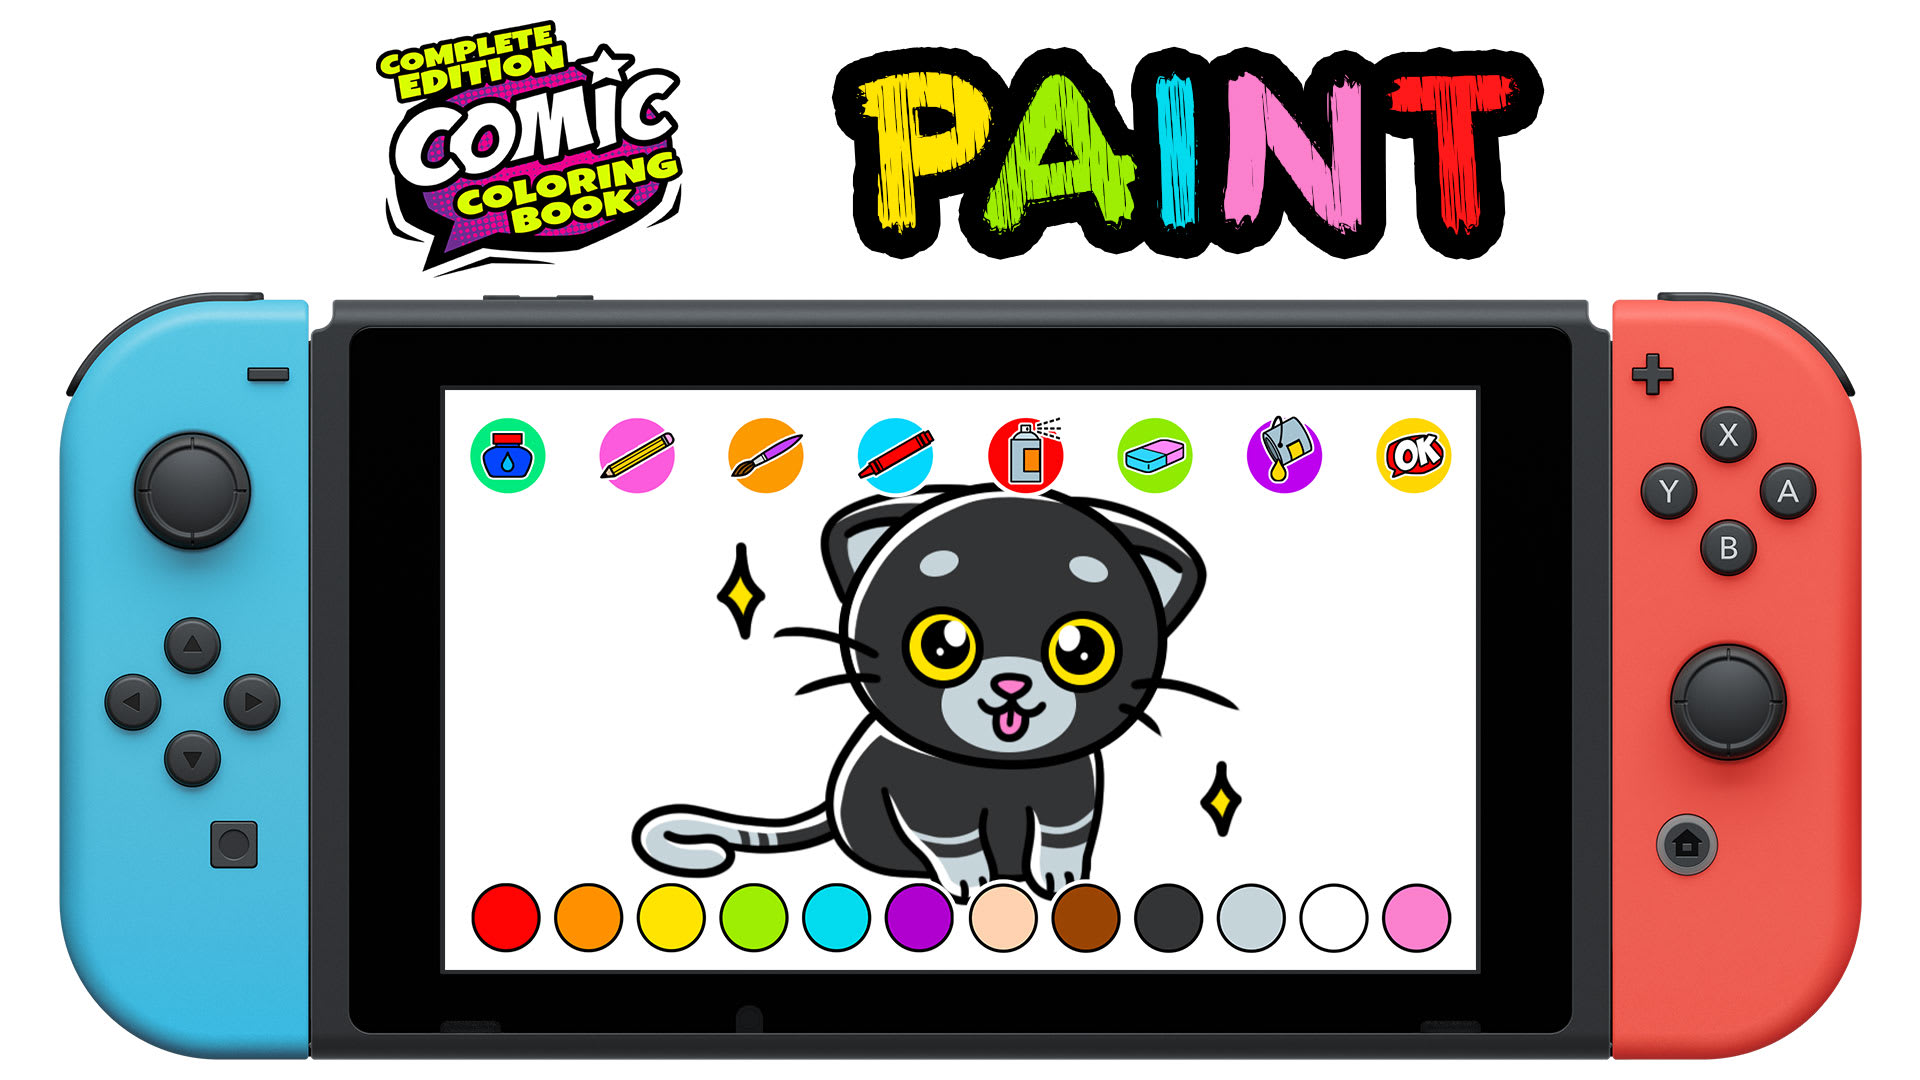 Comic Coloring Book Complete Edition: PAINT